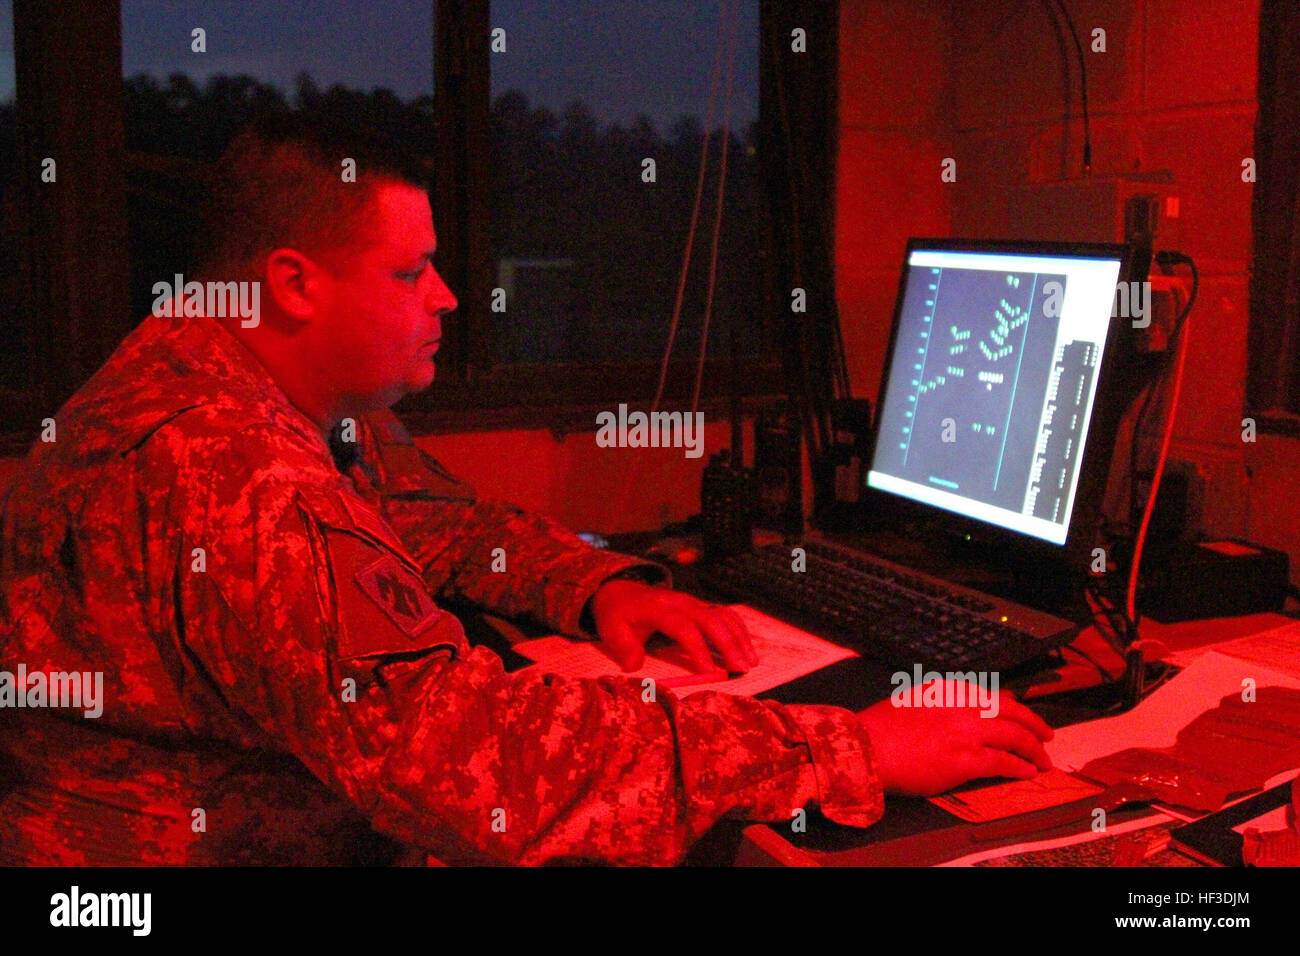 South Carolina National Guard Soldier Capt. Plowden Dixon, 1-118th Infantry Battalion training officer, watches the computer screen in the range tower as Soldiers on the range conduct night exercises June 19, 2015, during their annual training at Fort Stewart, Ga. The screen displays targets the Soldiers must engage which helps keep track of hits. The battalion spent nearly two weeks conducting training in a variety of squad and company level events as part of their annual training. This training helps them prepare for both peacetime situations and when they are called upon to protect the nati Stock Photo